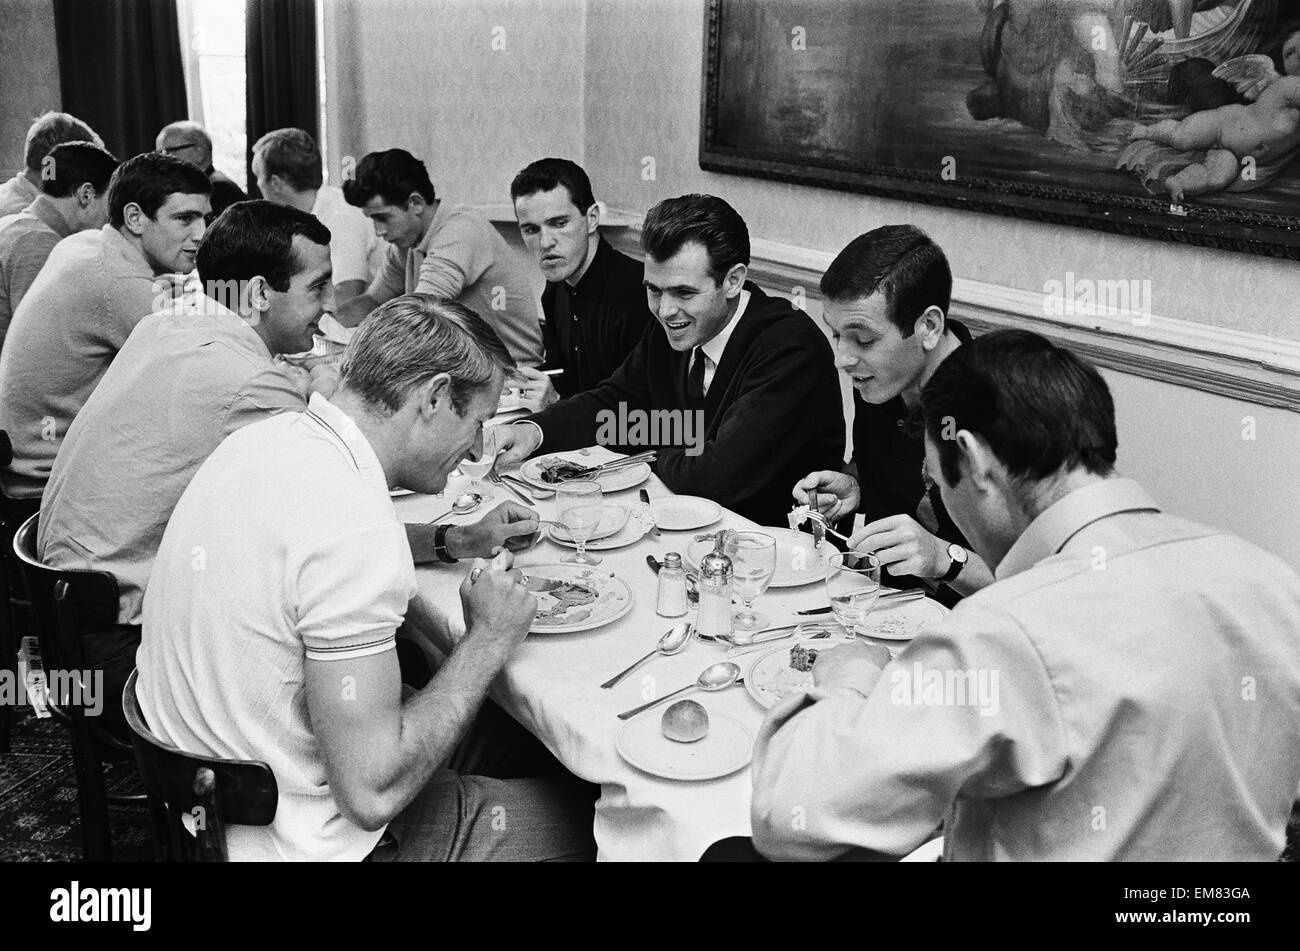 Members of the England football team including Terry Paine, John Connelly, Ian Callaghan, Jimmy Greaves, Roger Hunt and Jimmy Armfield eating breakfast at the team hotel in Hendon during the 1966 World Cup tournament. 10th July 1966. Stock Photo